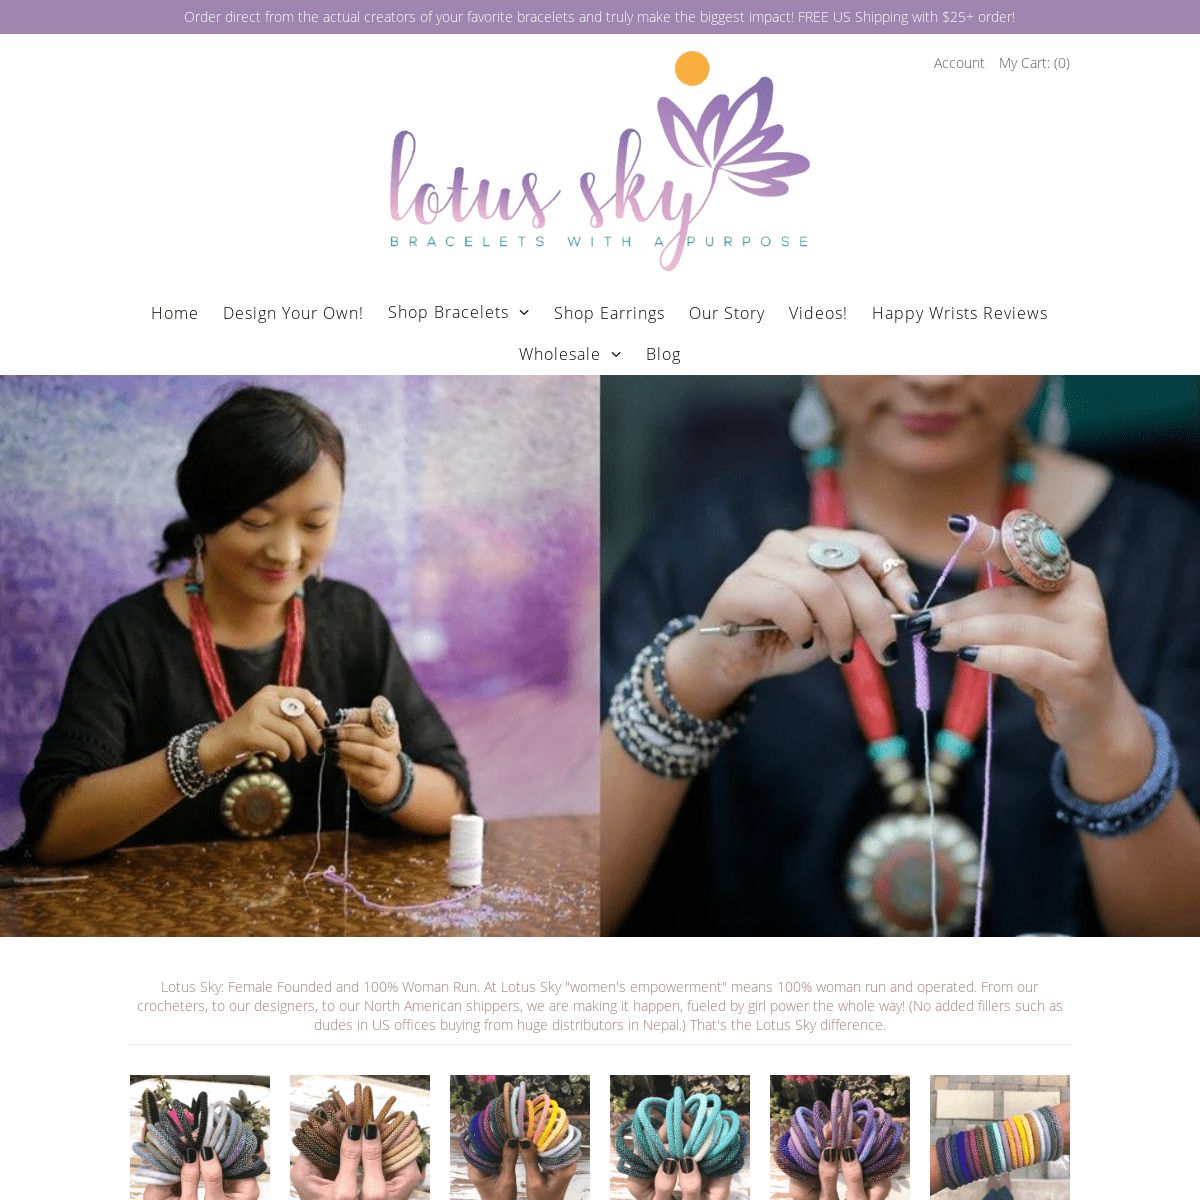 A complete backup of lotusskyjewelry.com